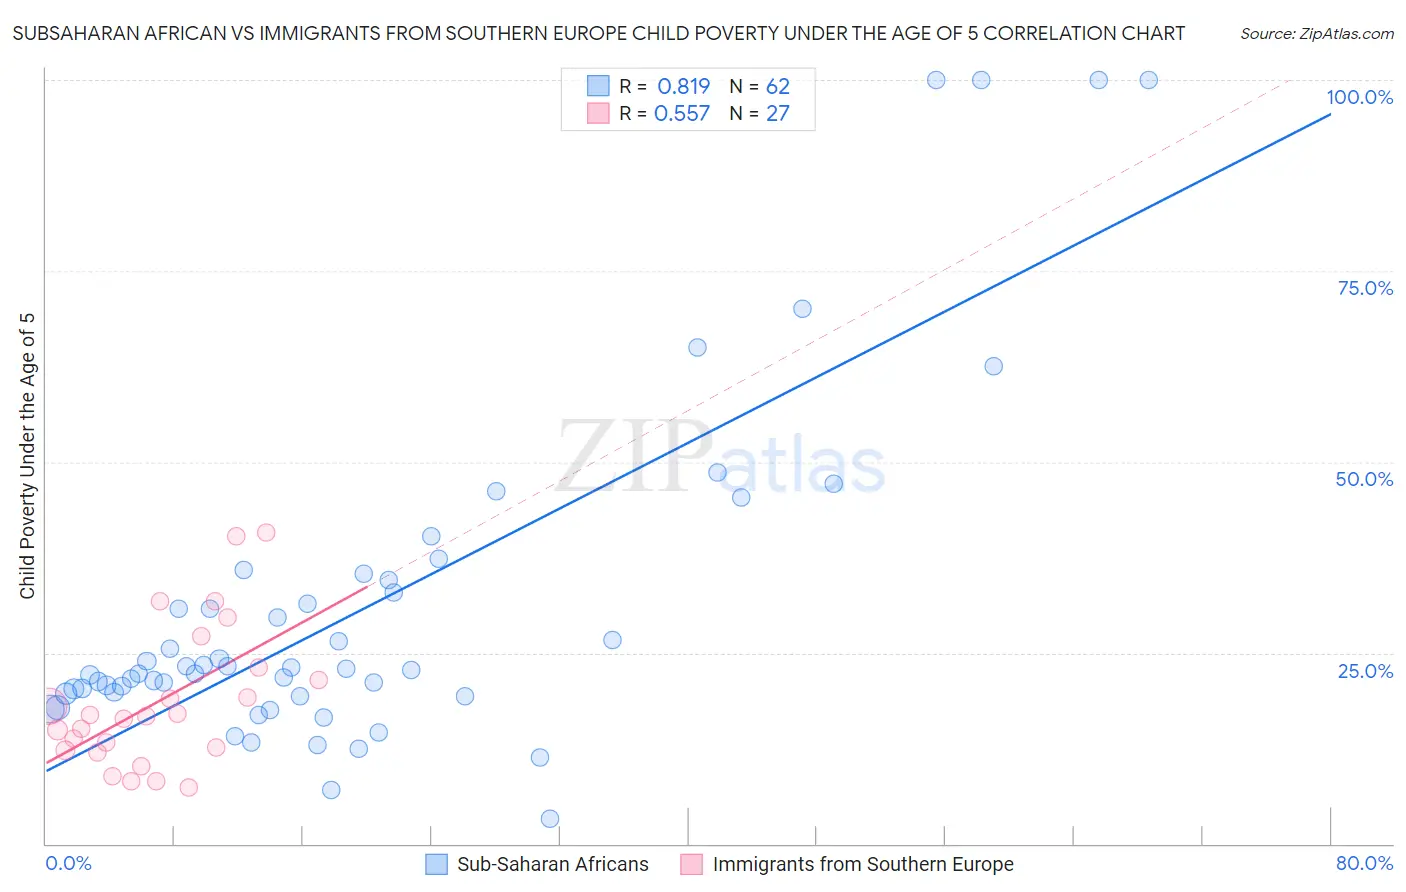 Subsaharan African vs Immigrants from Southern Europe Child Poverty Under the Age of 5